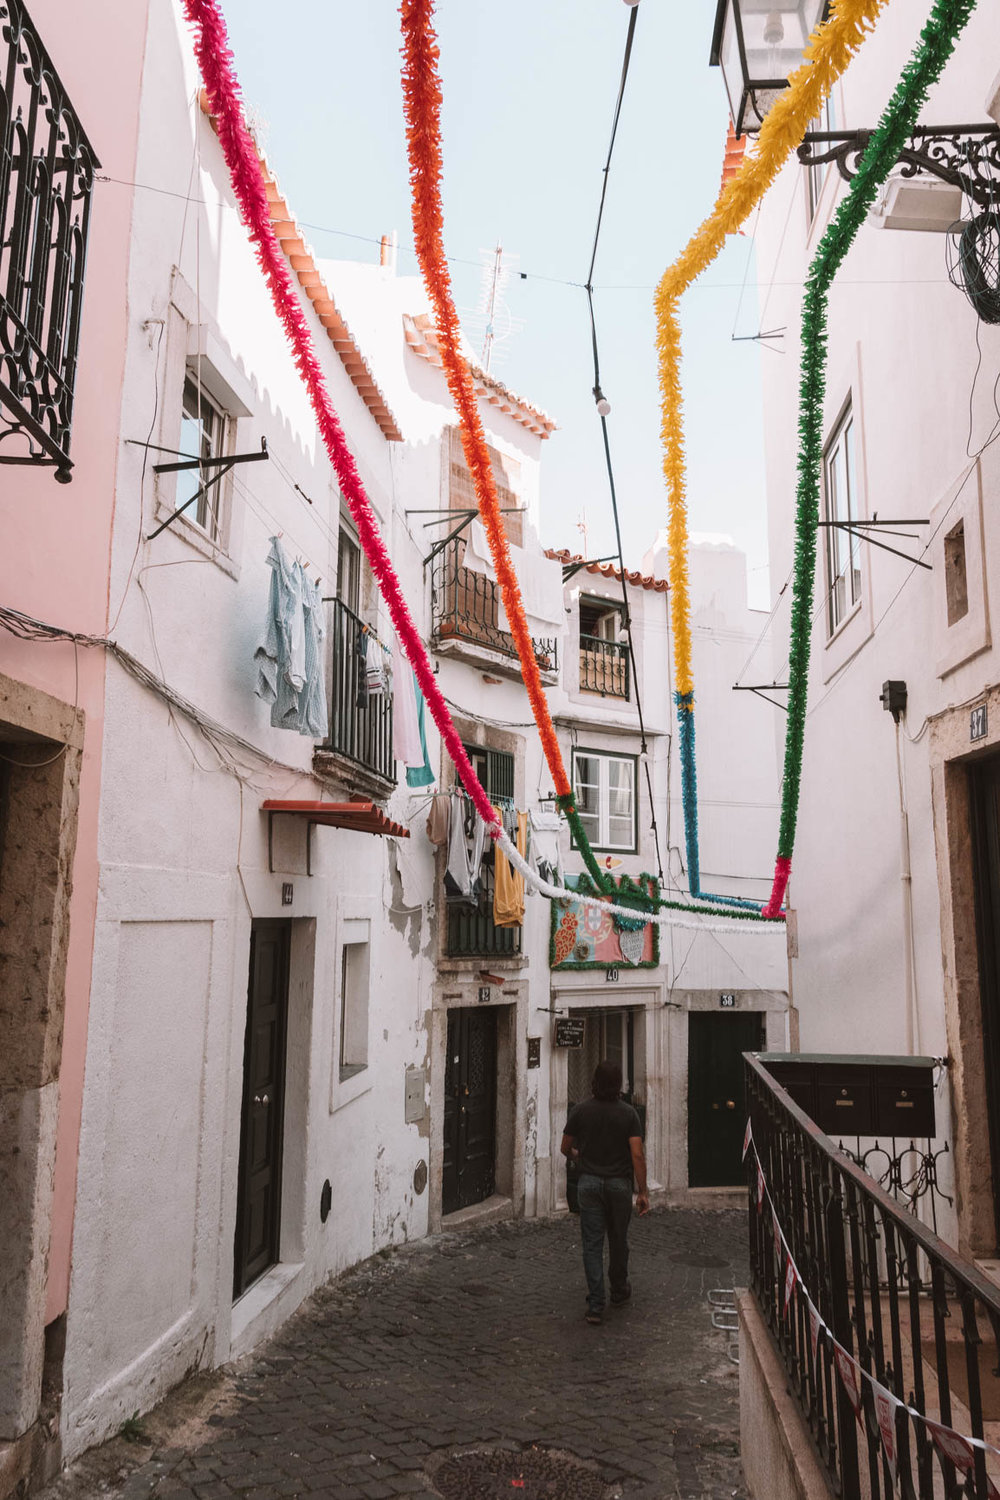 Fun Things to do in Lisbon Portugal - Explore Bairro Alto and Alfama #Lisbon #Portugal #Europe 2 - 3 Days Itinerary in Lisbon